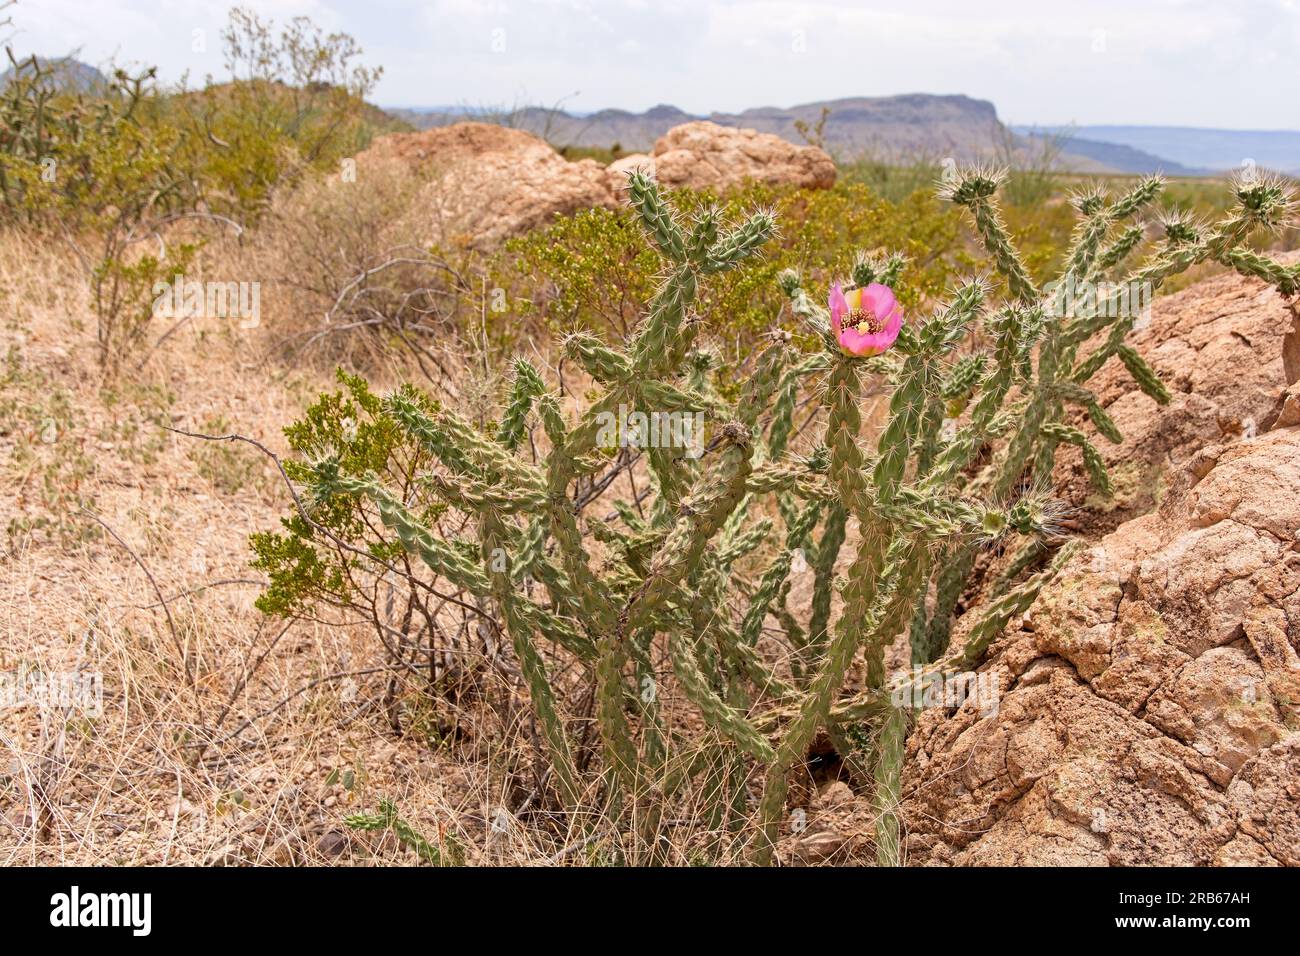 Solitary Bloom on cane cholla cactus  in field of creosote bush in Chihuahuan desert Stock Photo